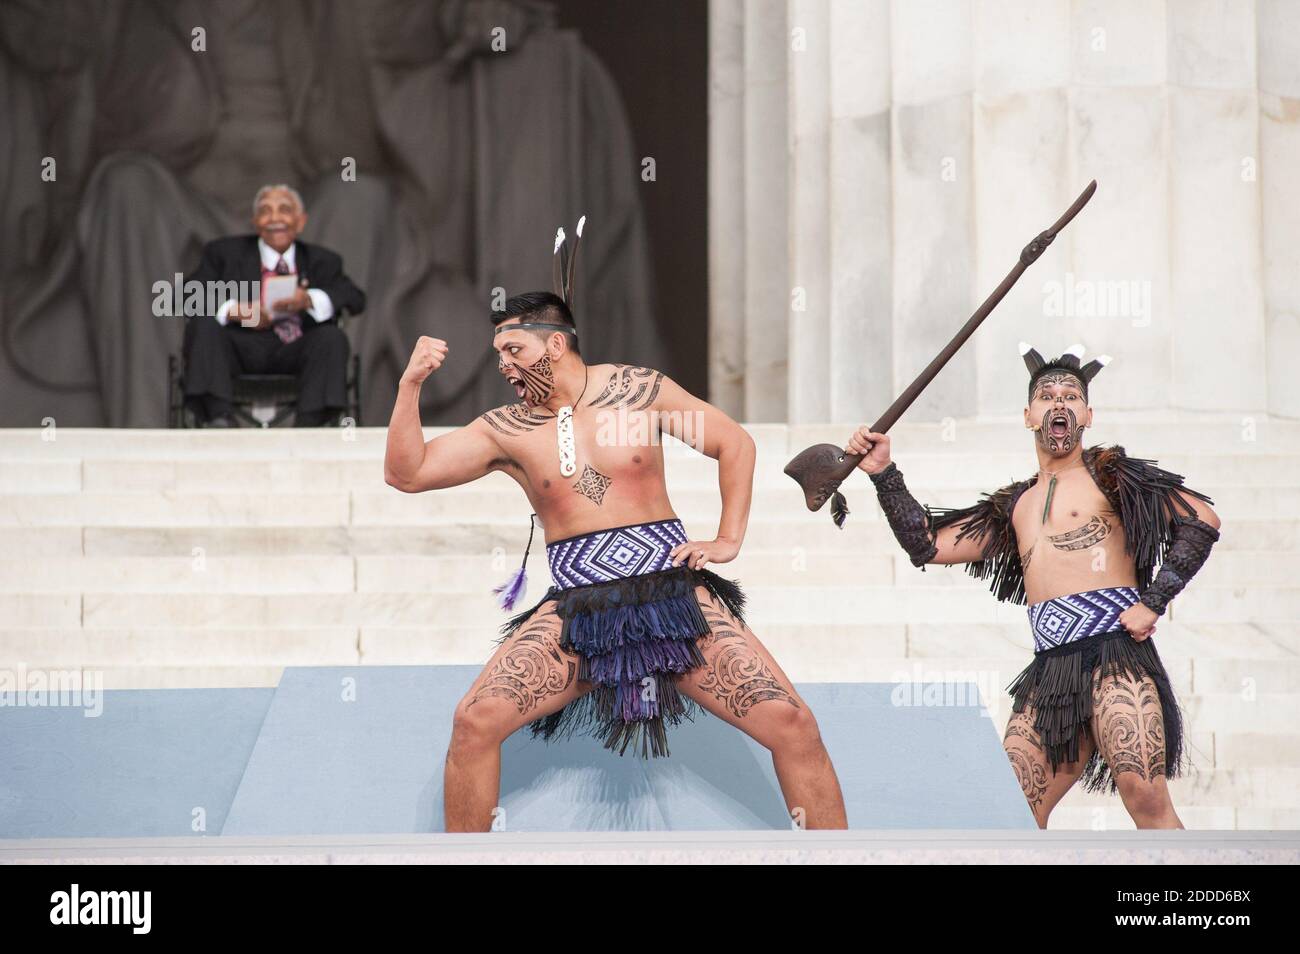 NO FILM, NO VIDEO, NO TV, NO DOCUMENTARY - Maori dancers from Destiny Church, New Zealand, perform as Rev. Joseph Lowery enjoys the performance in the background during the Let Freedom Ring ceremony to commemorate the 50th anniversary of the March on Washington for Jobs and Freedom at the Lincoln Memorial in Washington, DC, USA, Wednesday, August 28, 2013. Photo by Andre Chung/MCT/ABACAPRESS.COM Stock Photo